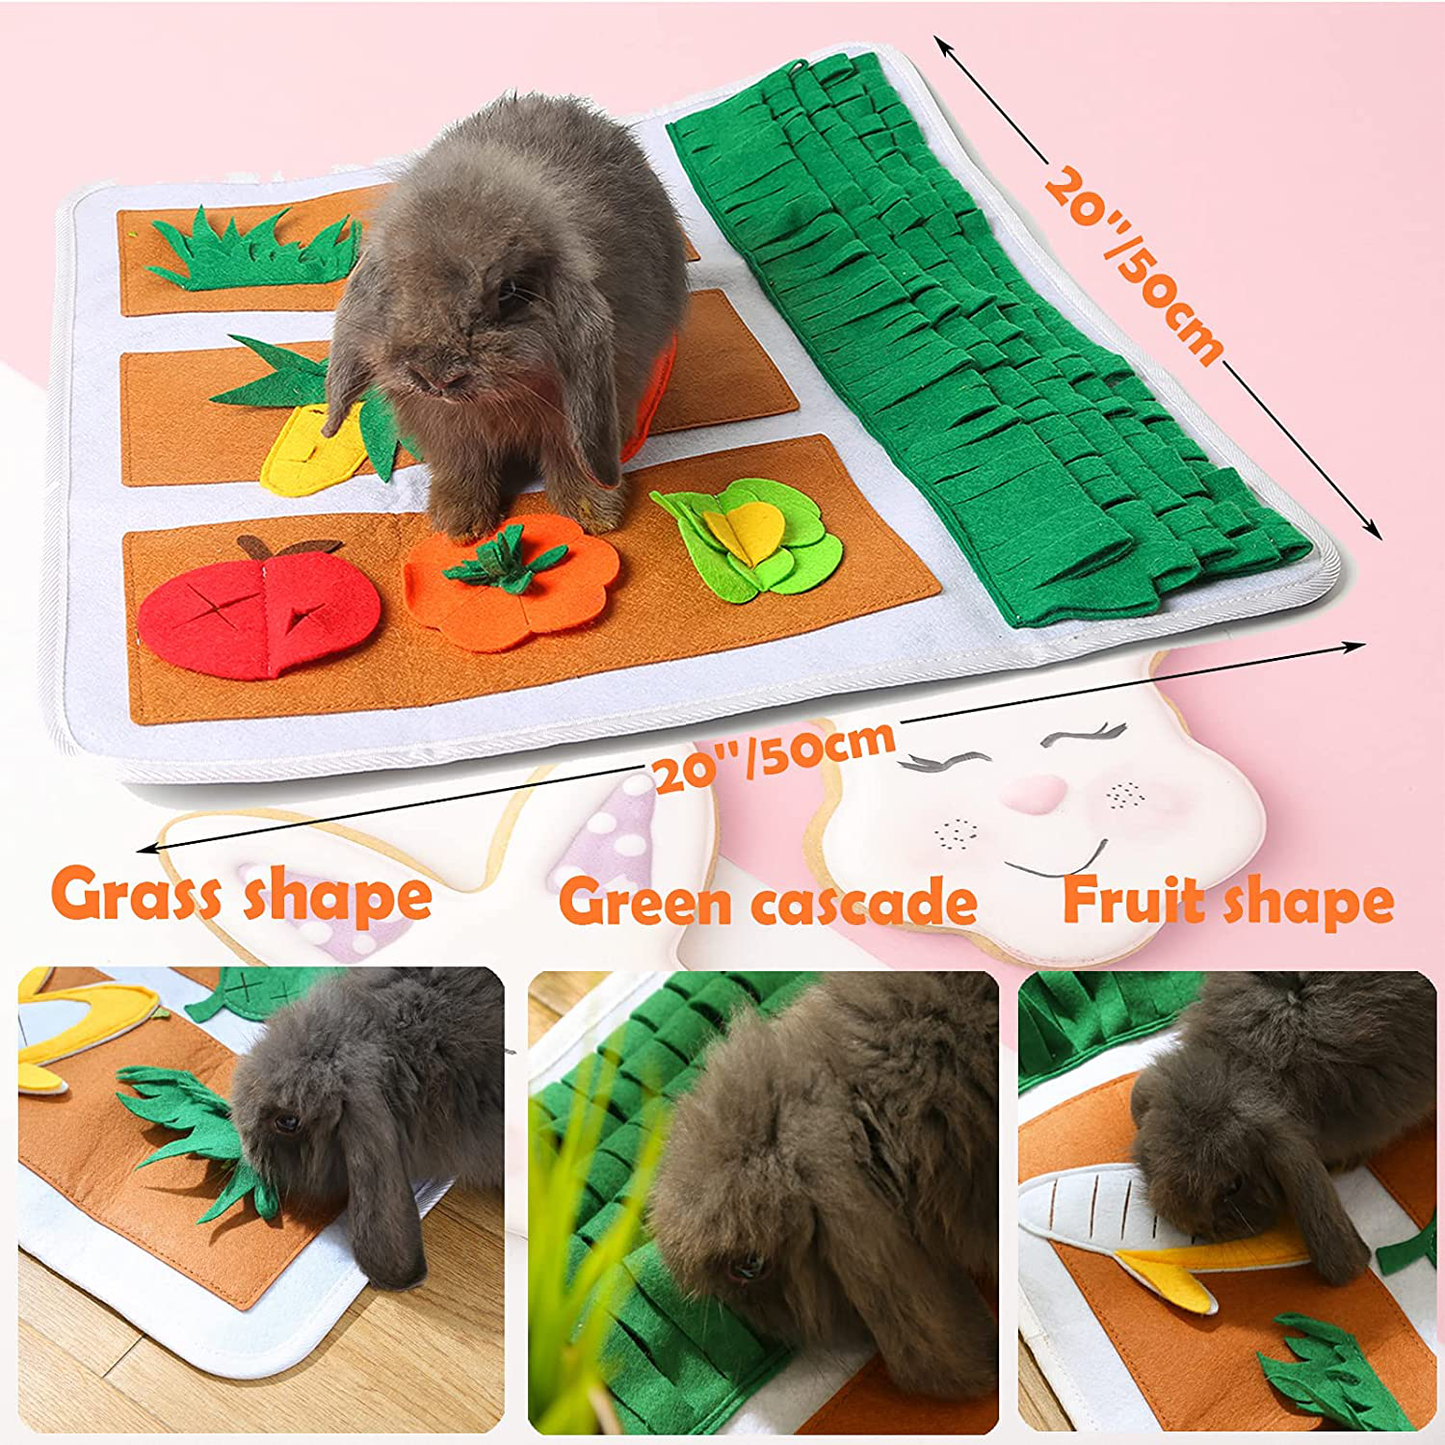 Rabbit Foraging Mat 20" × 20" Machine Washable Polar Fleece Pet Snuffle Mat Encourages Natural Foraging Skills Interactive Games for Bunny, Guinea Pigs, Chinchillas, Small Animals, Dog